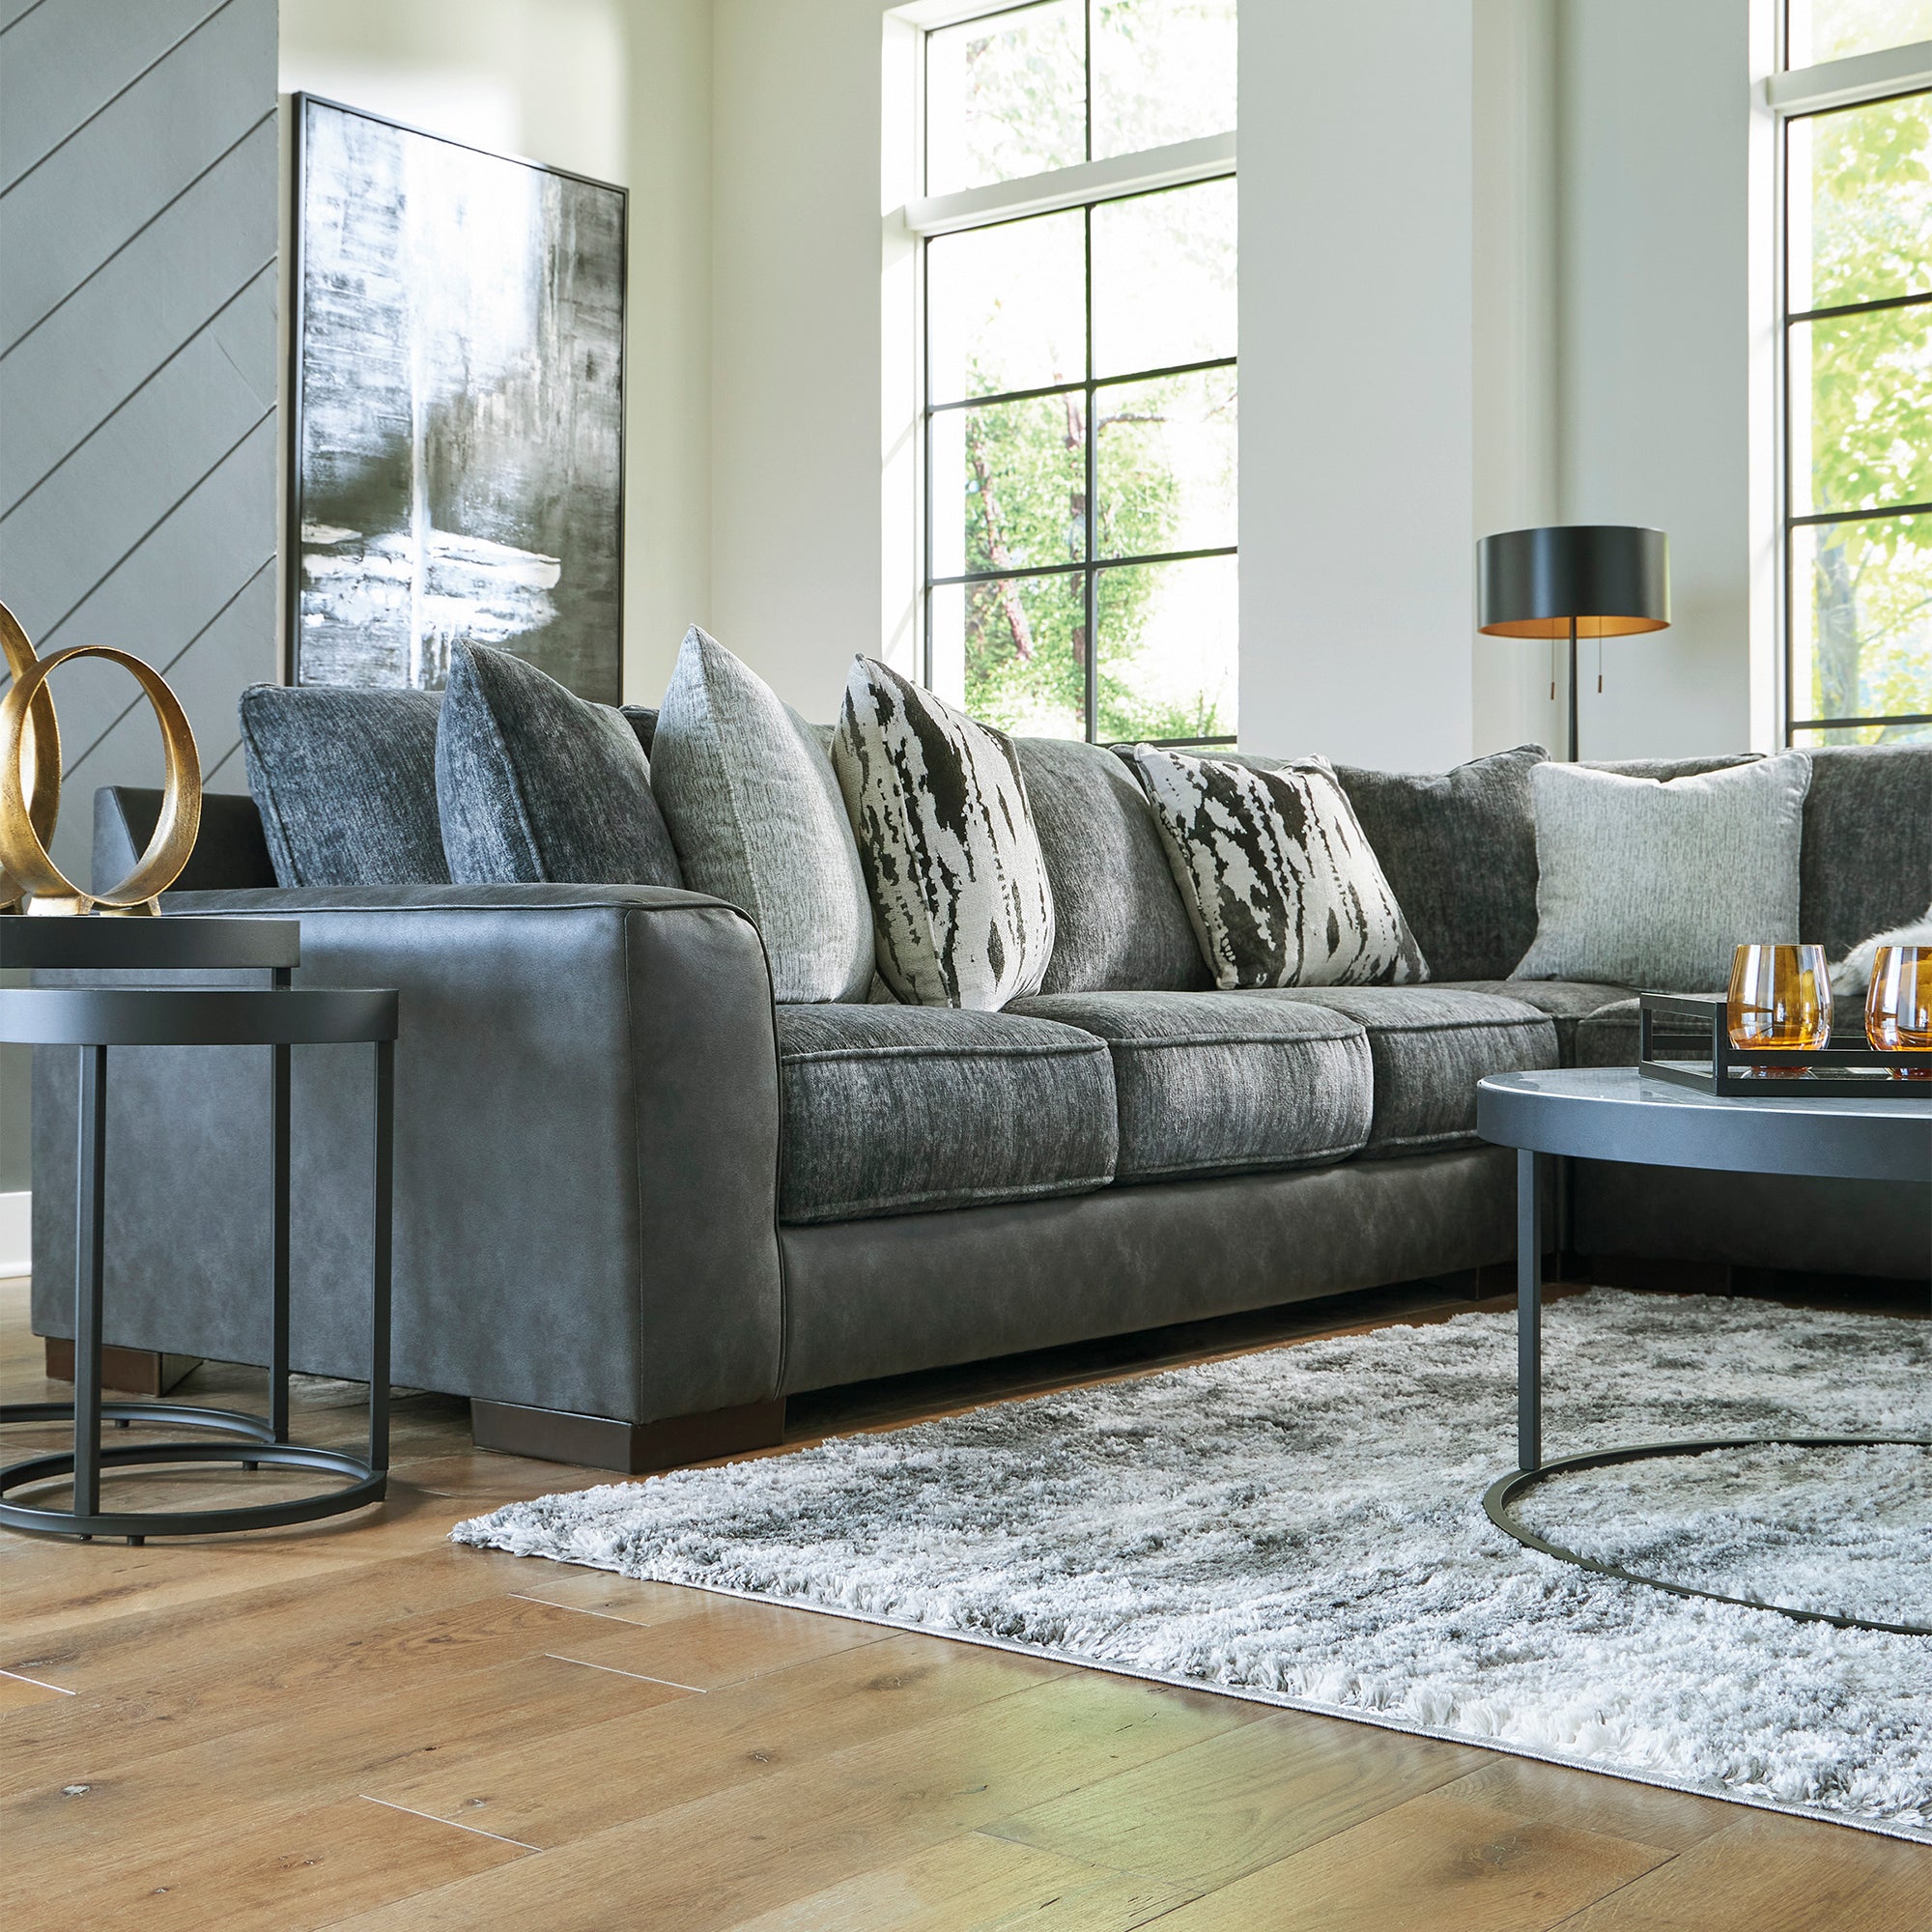 Larkstone 4-Piece Sectional with Chaise